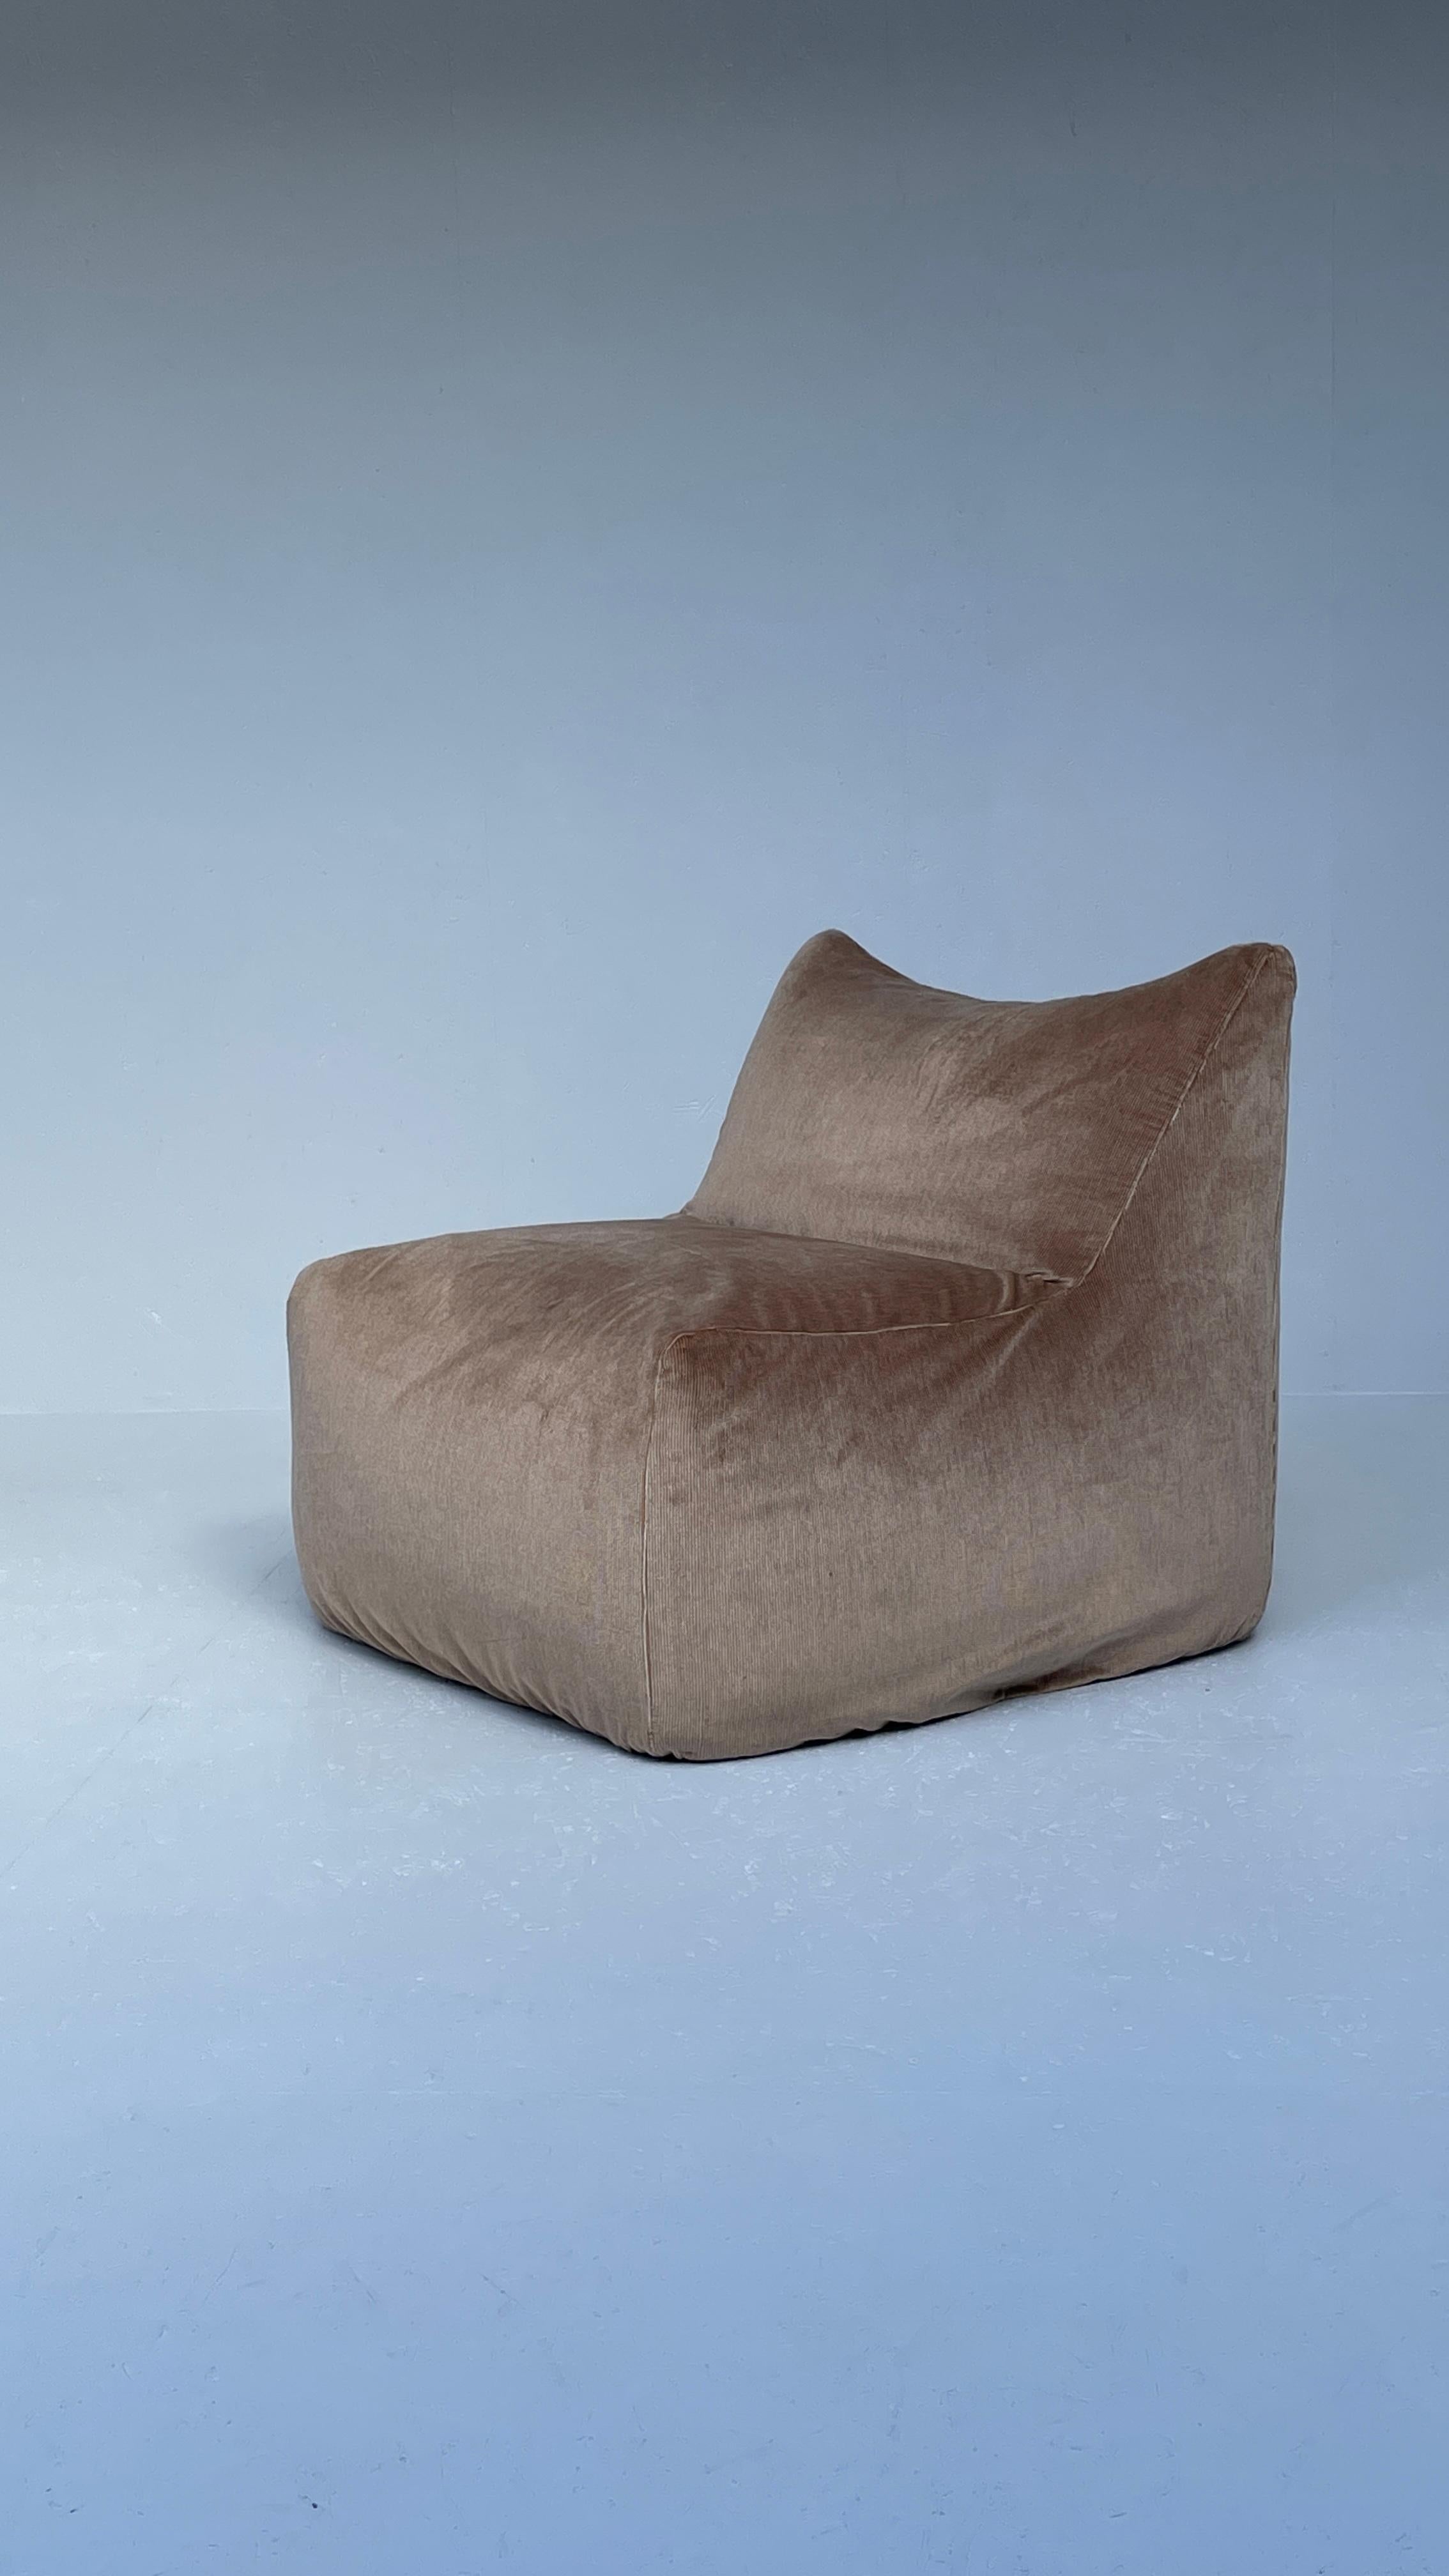 Mario Bellini designed the Bambola lounge chair as part of the Le Bambole series in 1972 for B&B Italia. The series has earned numer­ous awards, includ­ing the pres­ti­gious Compasso d’Oro in 1979. If you have ever taken one of your bed pillows